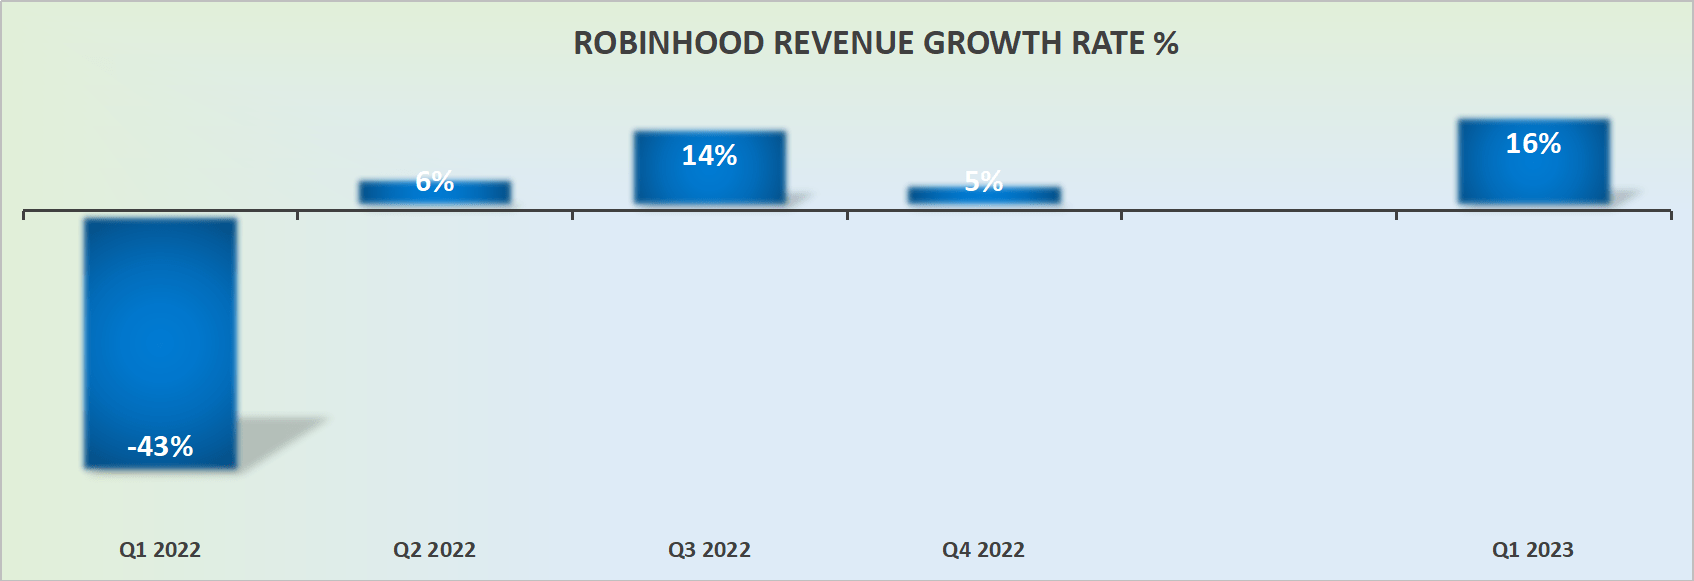 Robinhood Q1 Earnings Found Stability, Could Interesting